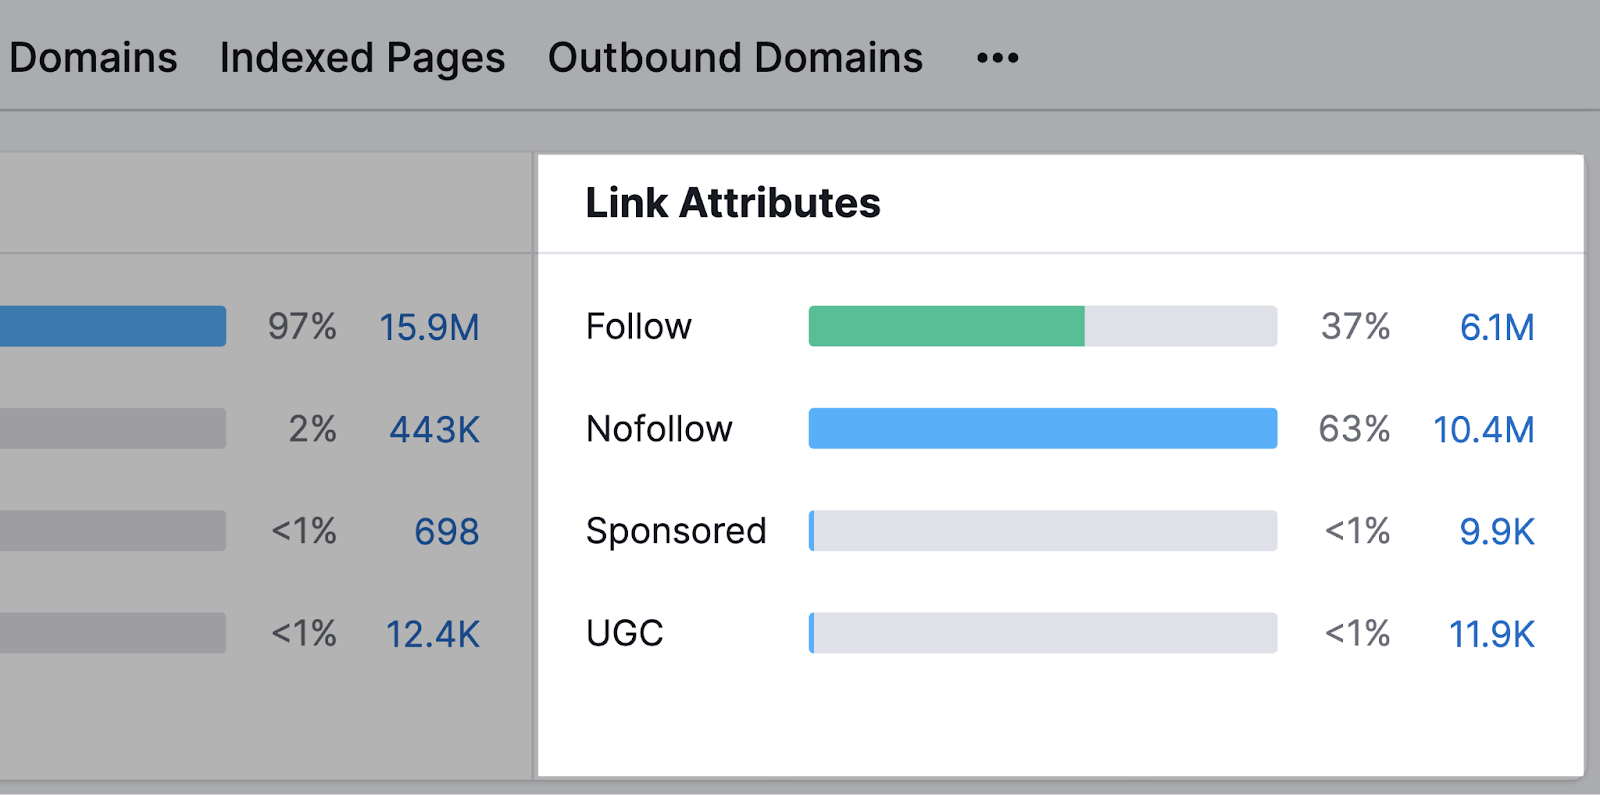 "Link Attributes" conception  shows a breakdown for follow, nofollow, sponsored and ugc links